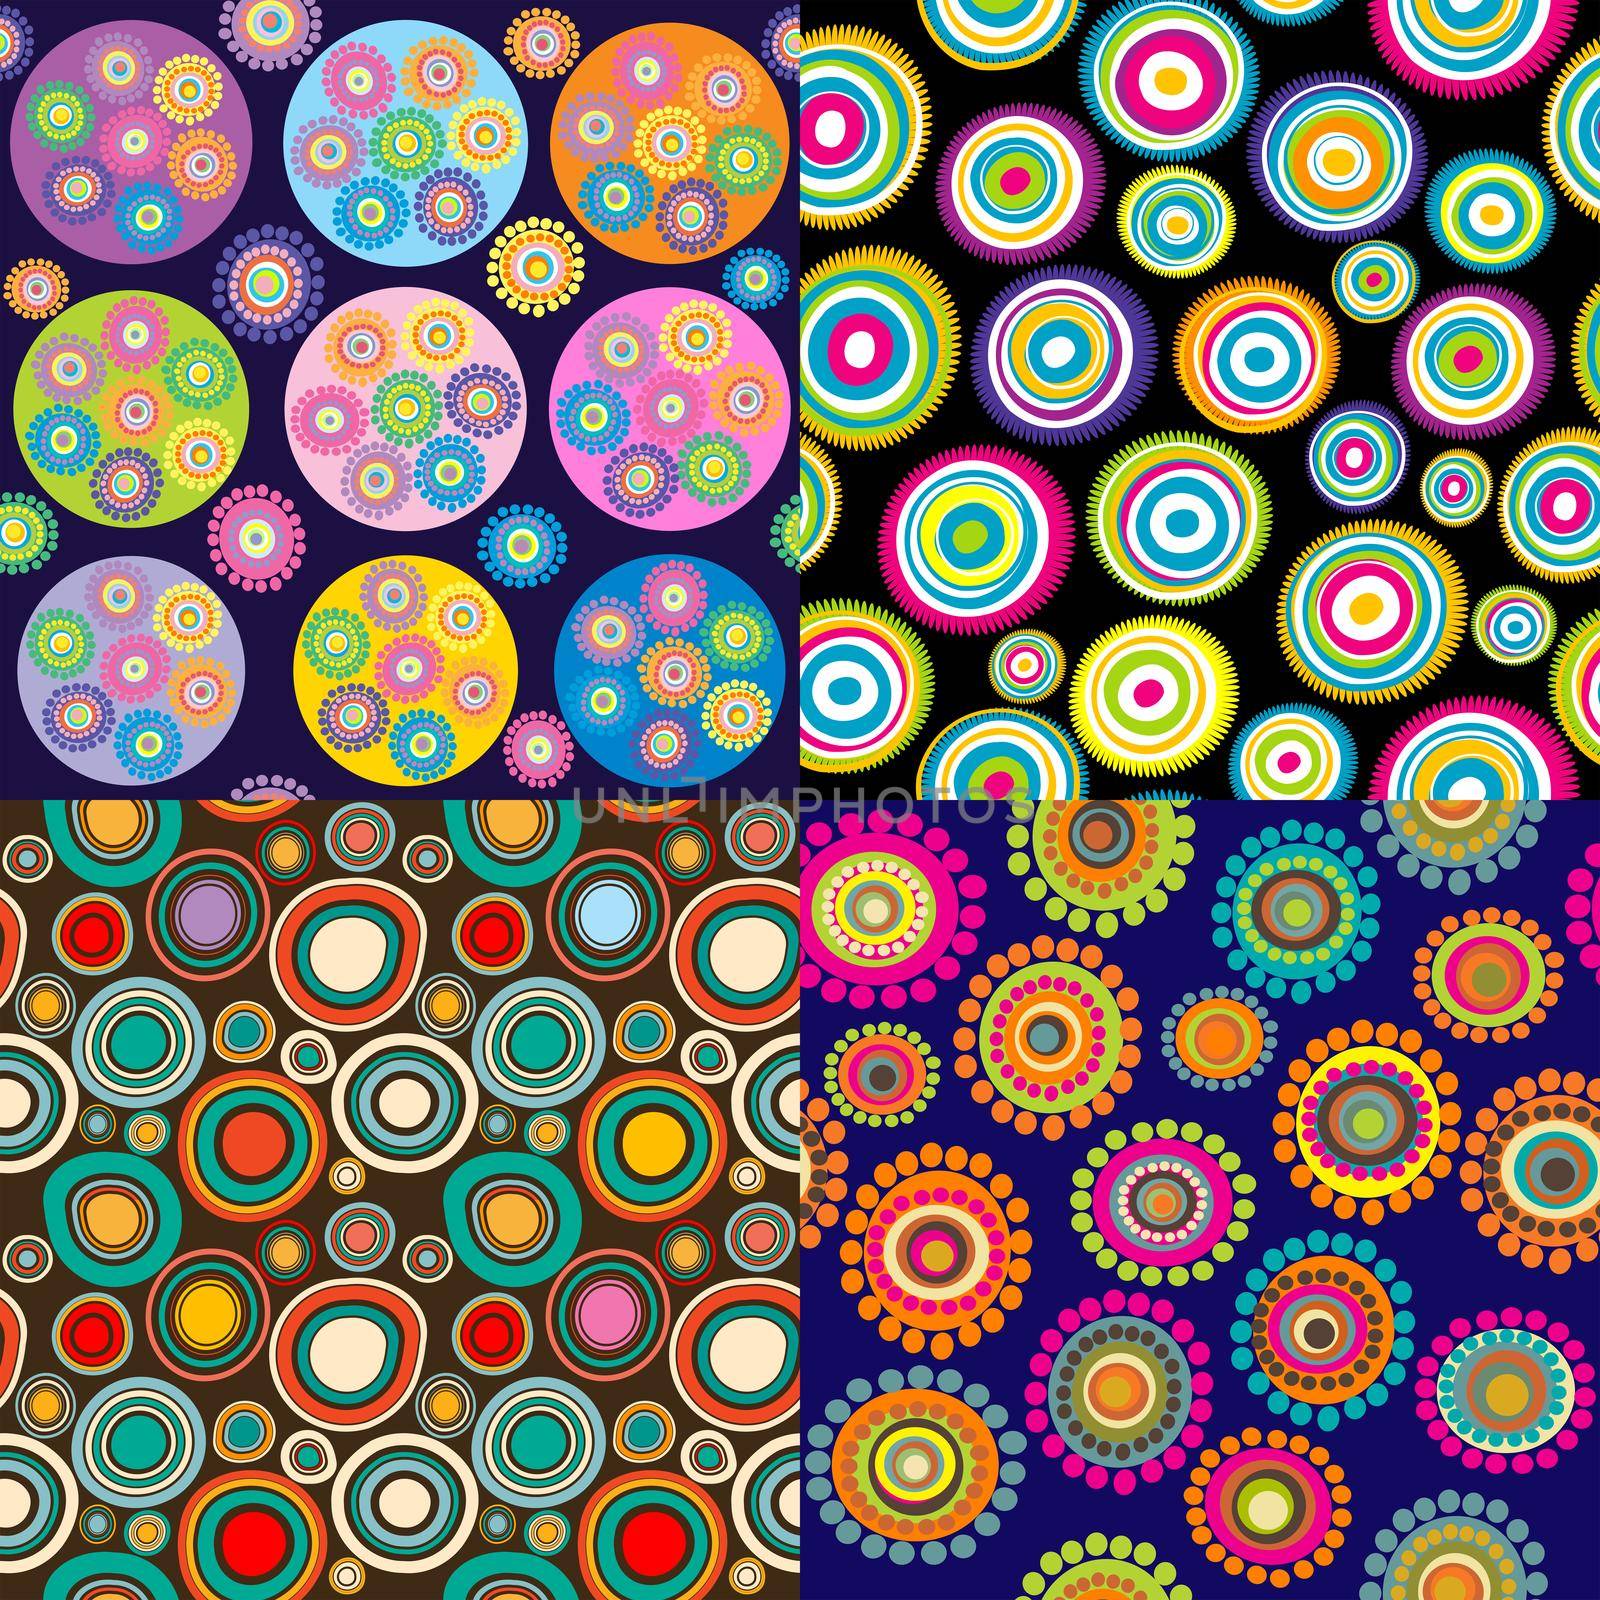 Set of four backgrounds with circular shapes and flowers made of dots